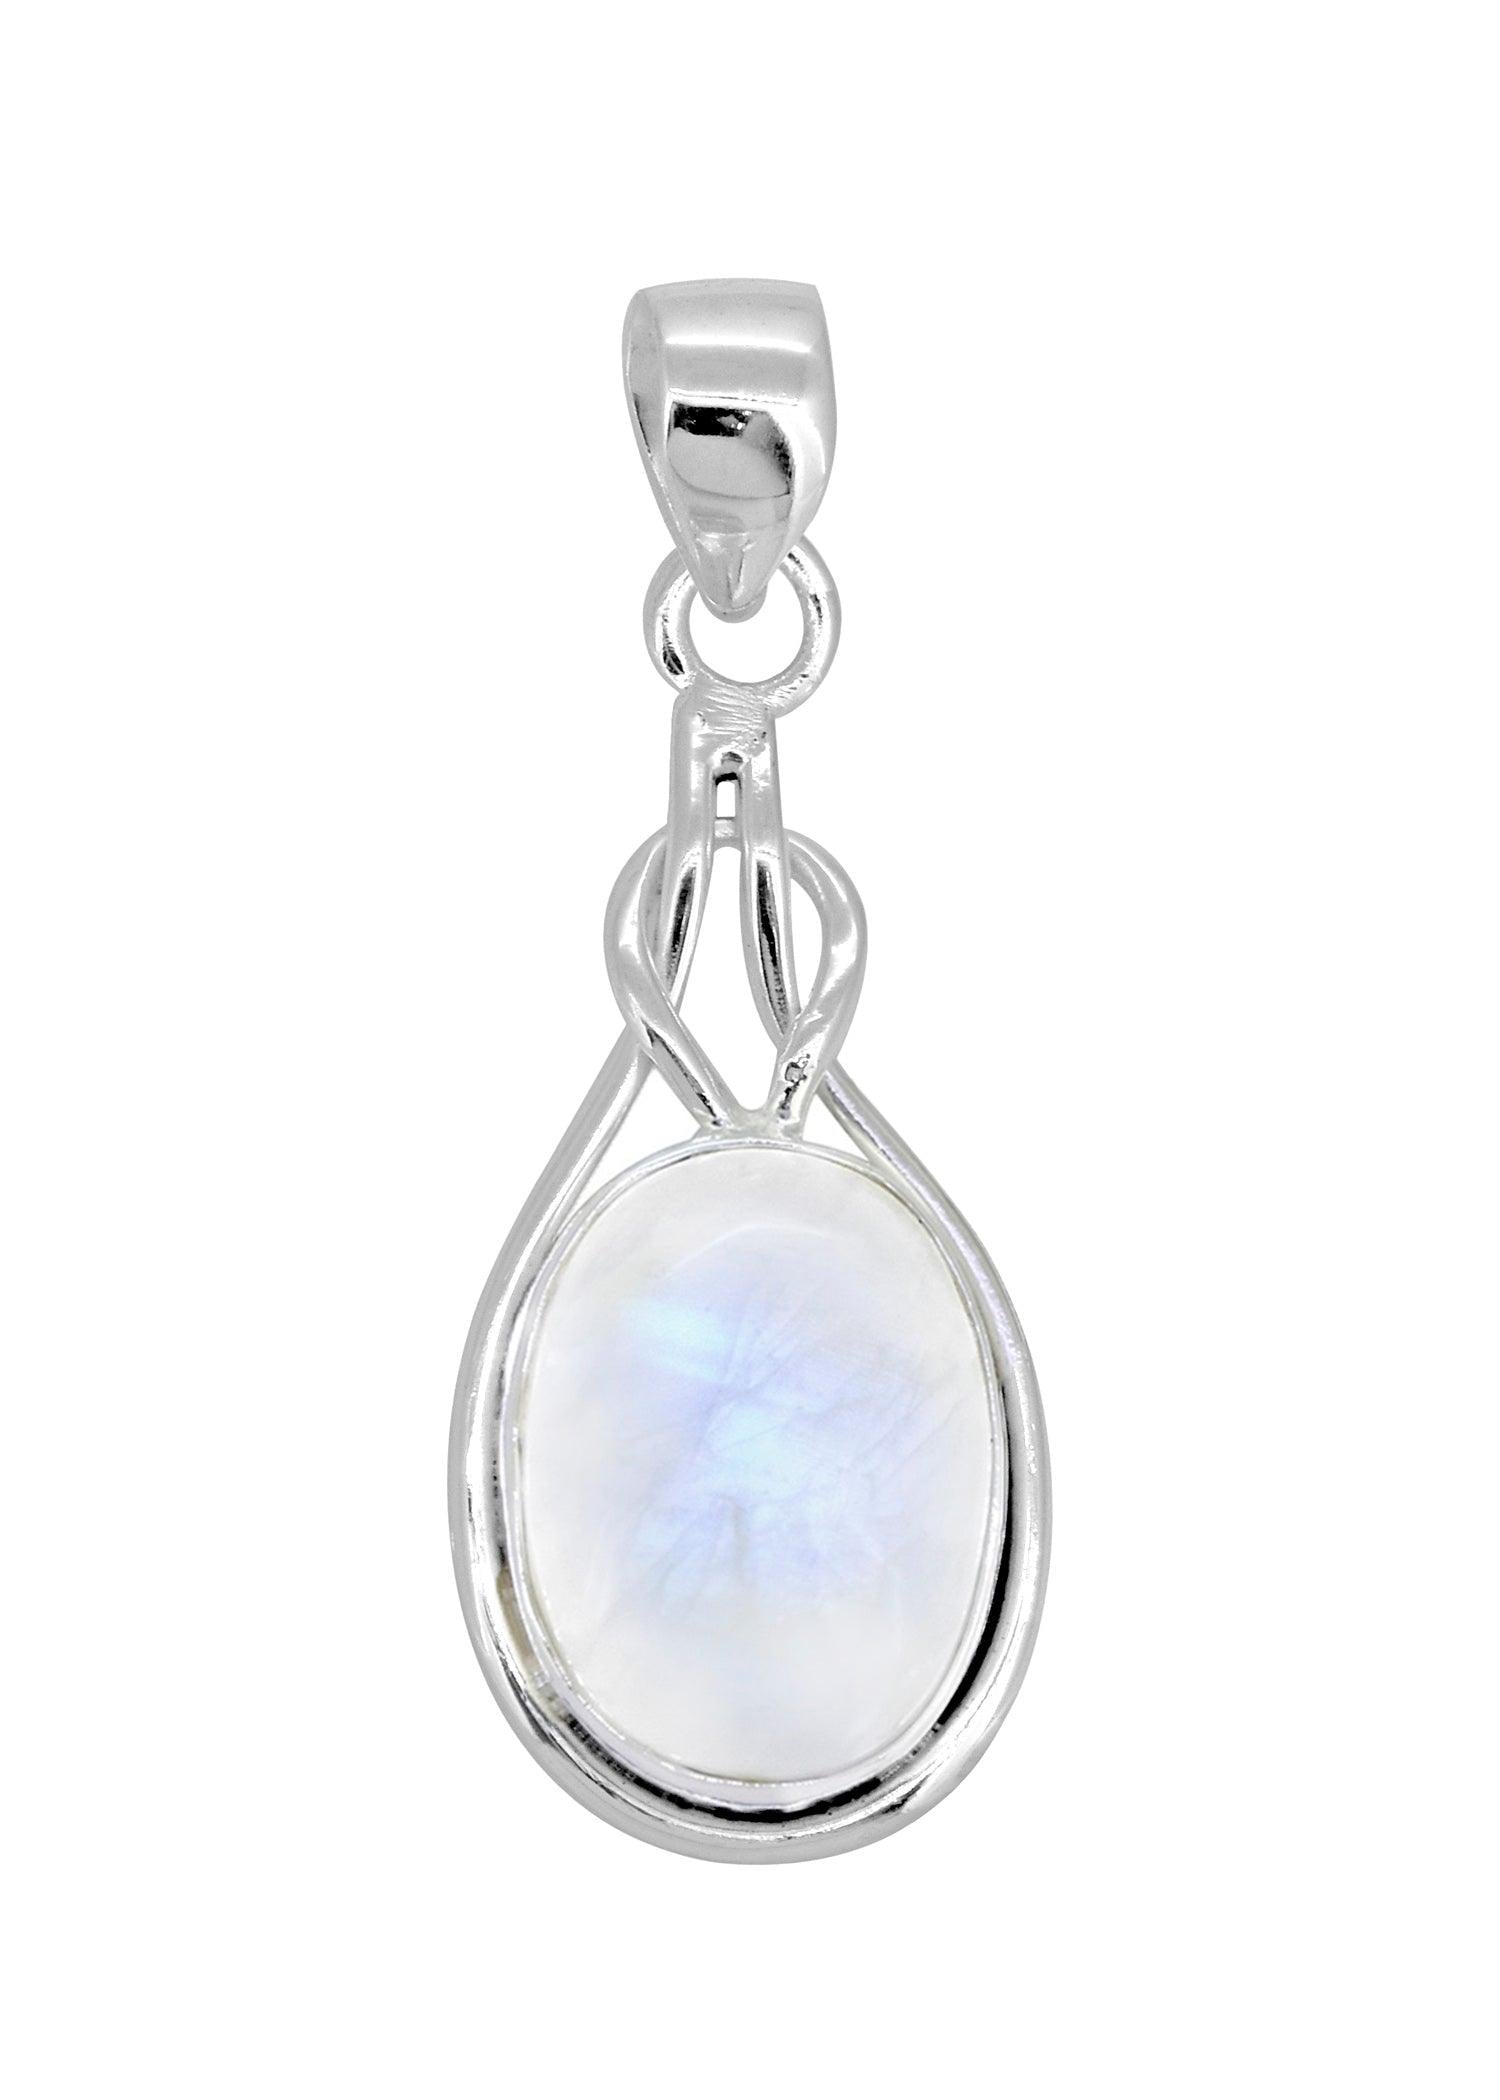 Rainbow Moonstone Solid 925 Sterling Silver Chain Knot Pendant Jewelry - YoTreasure